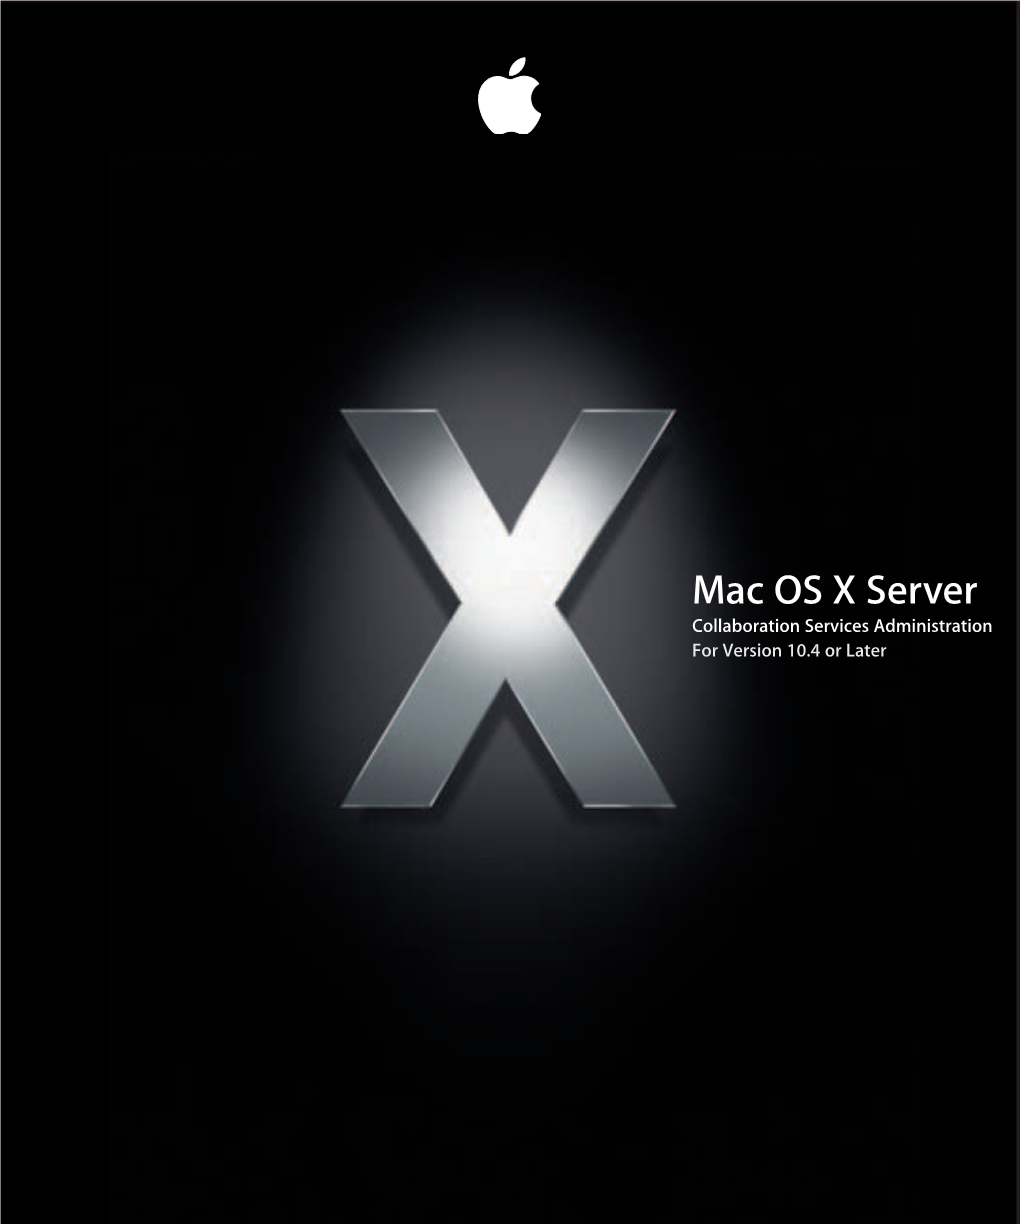 Mac OS X Server Collaboration Services Administration for Version 10.4 Or Later